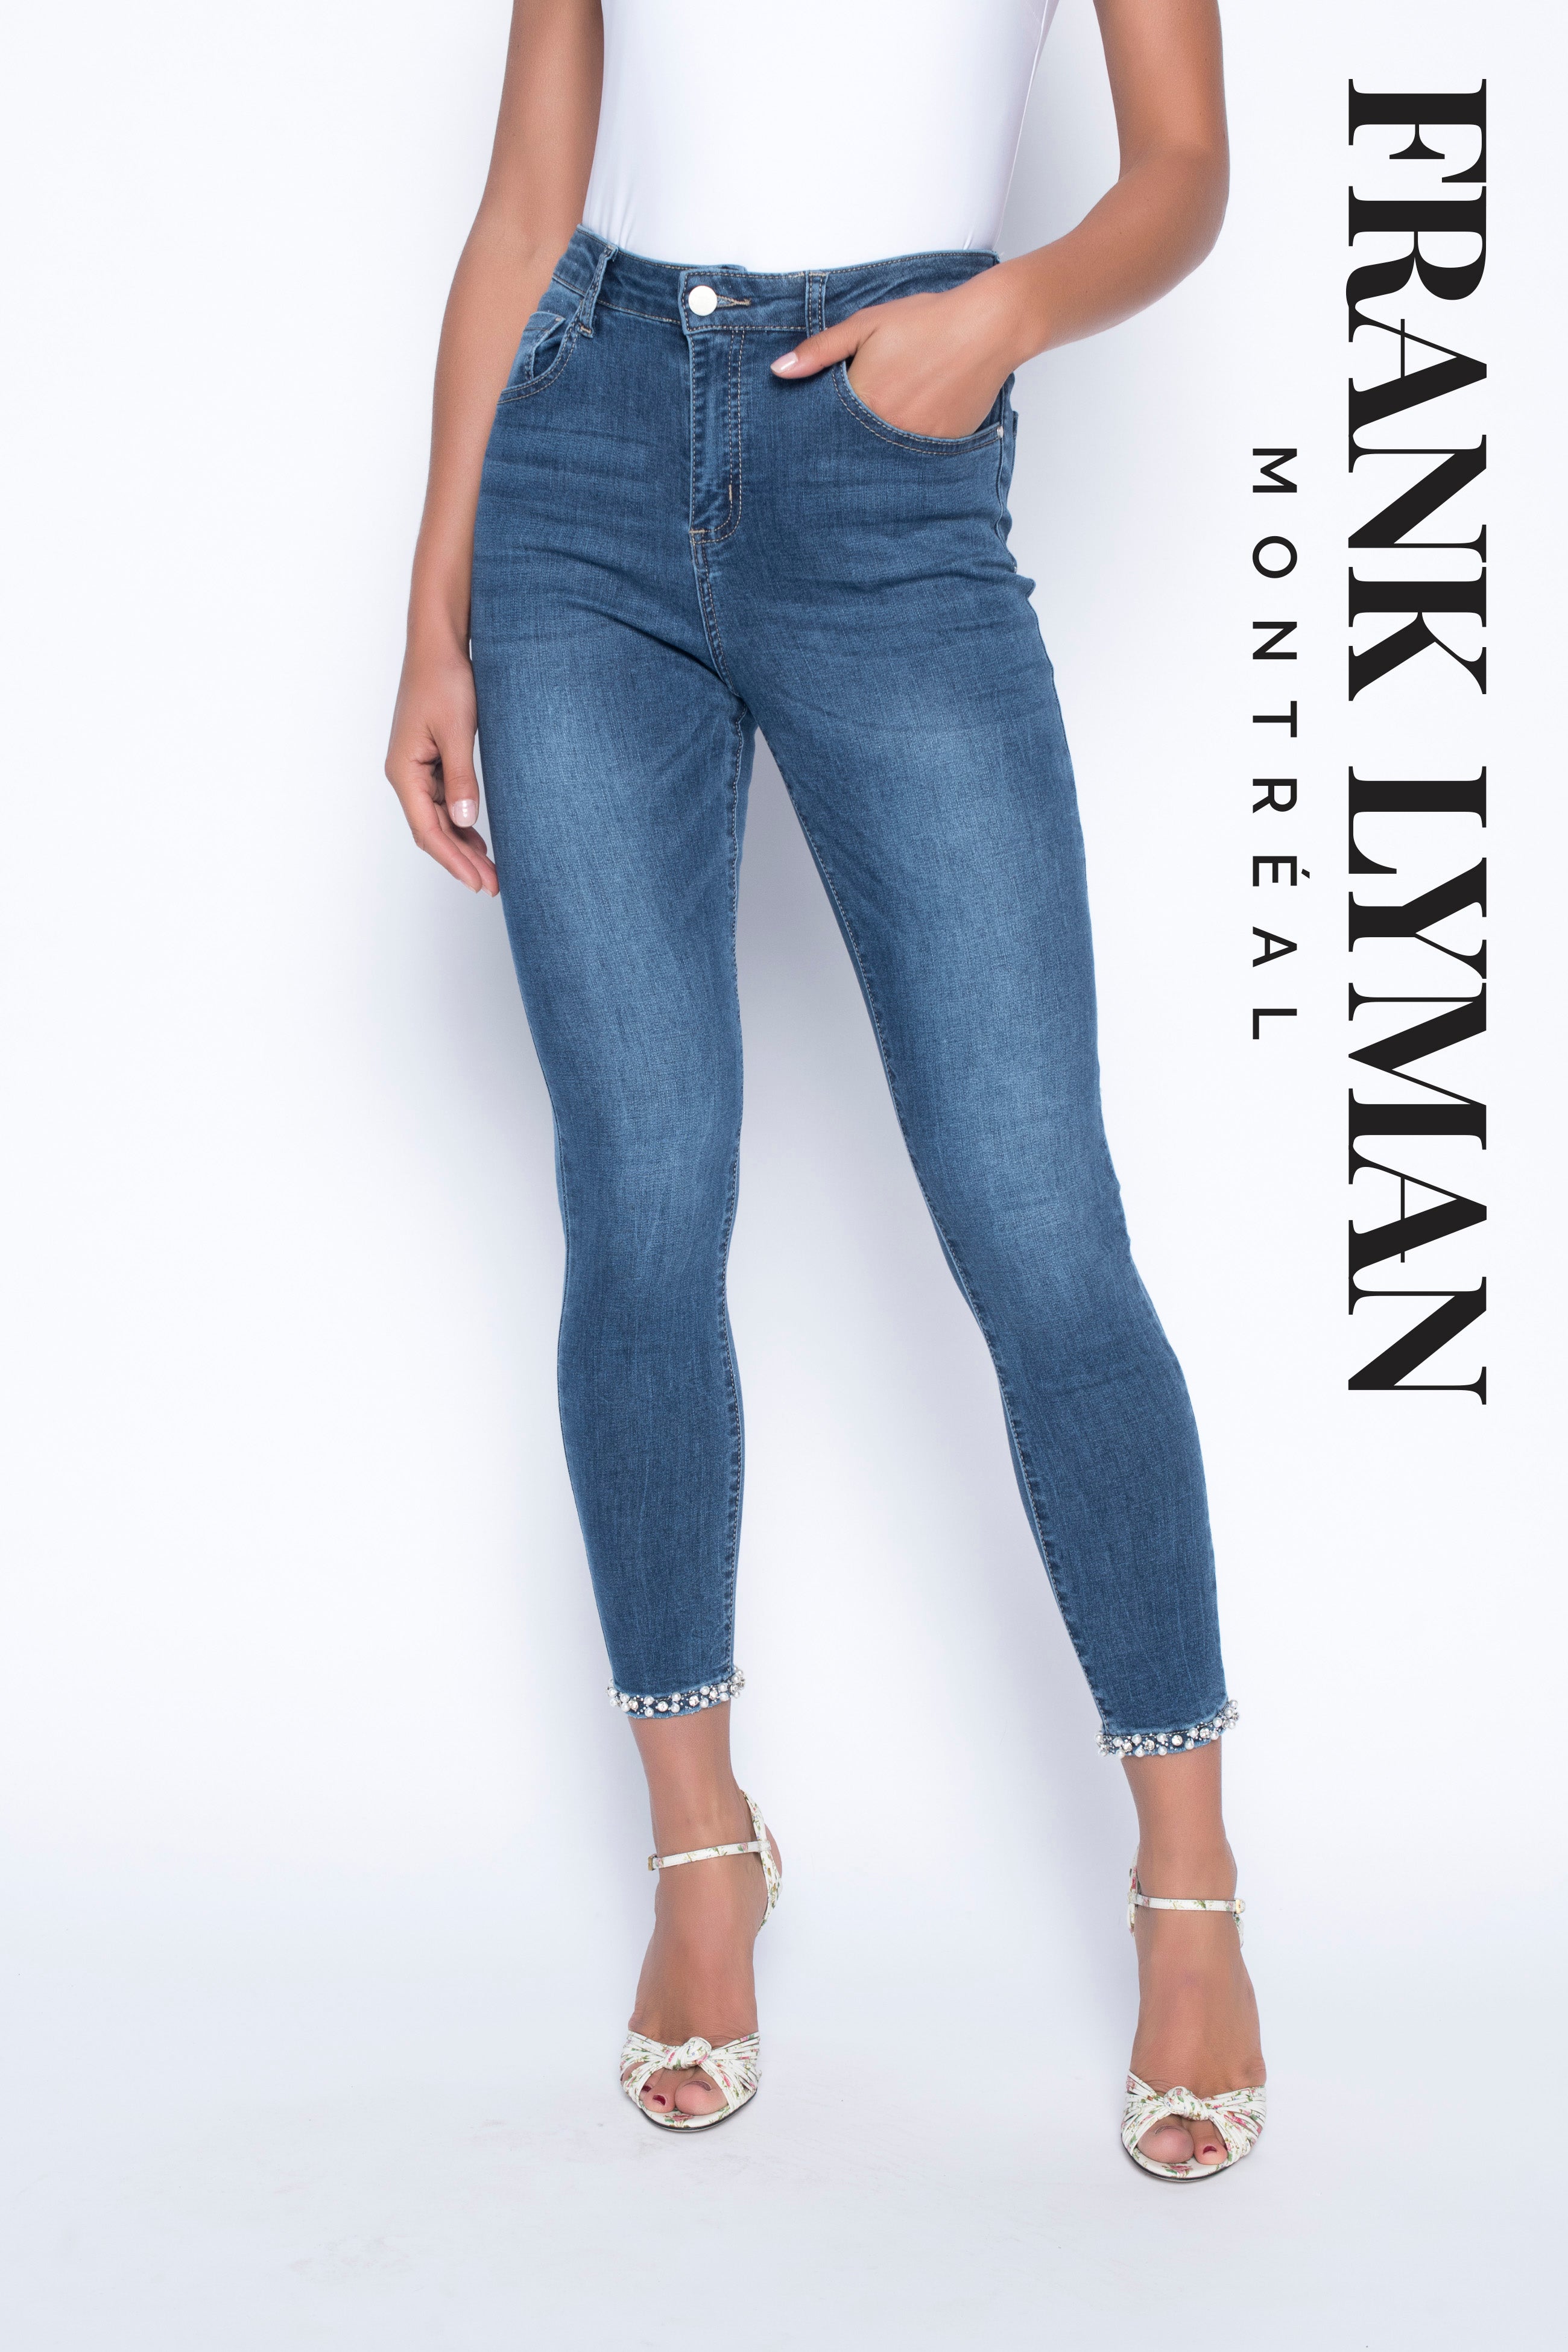 Frank Lyman Montreal Pearl Bow Jeans-Frank Lyman Montreal Pearl Jeans 